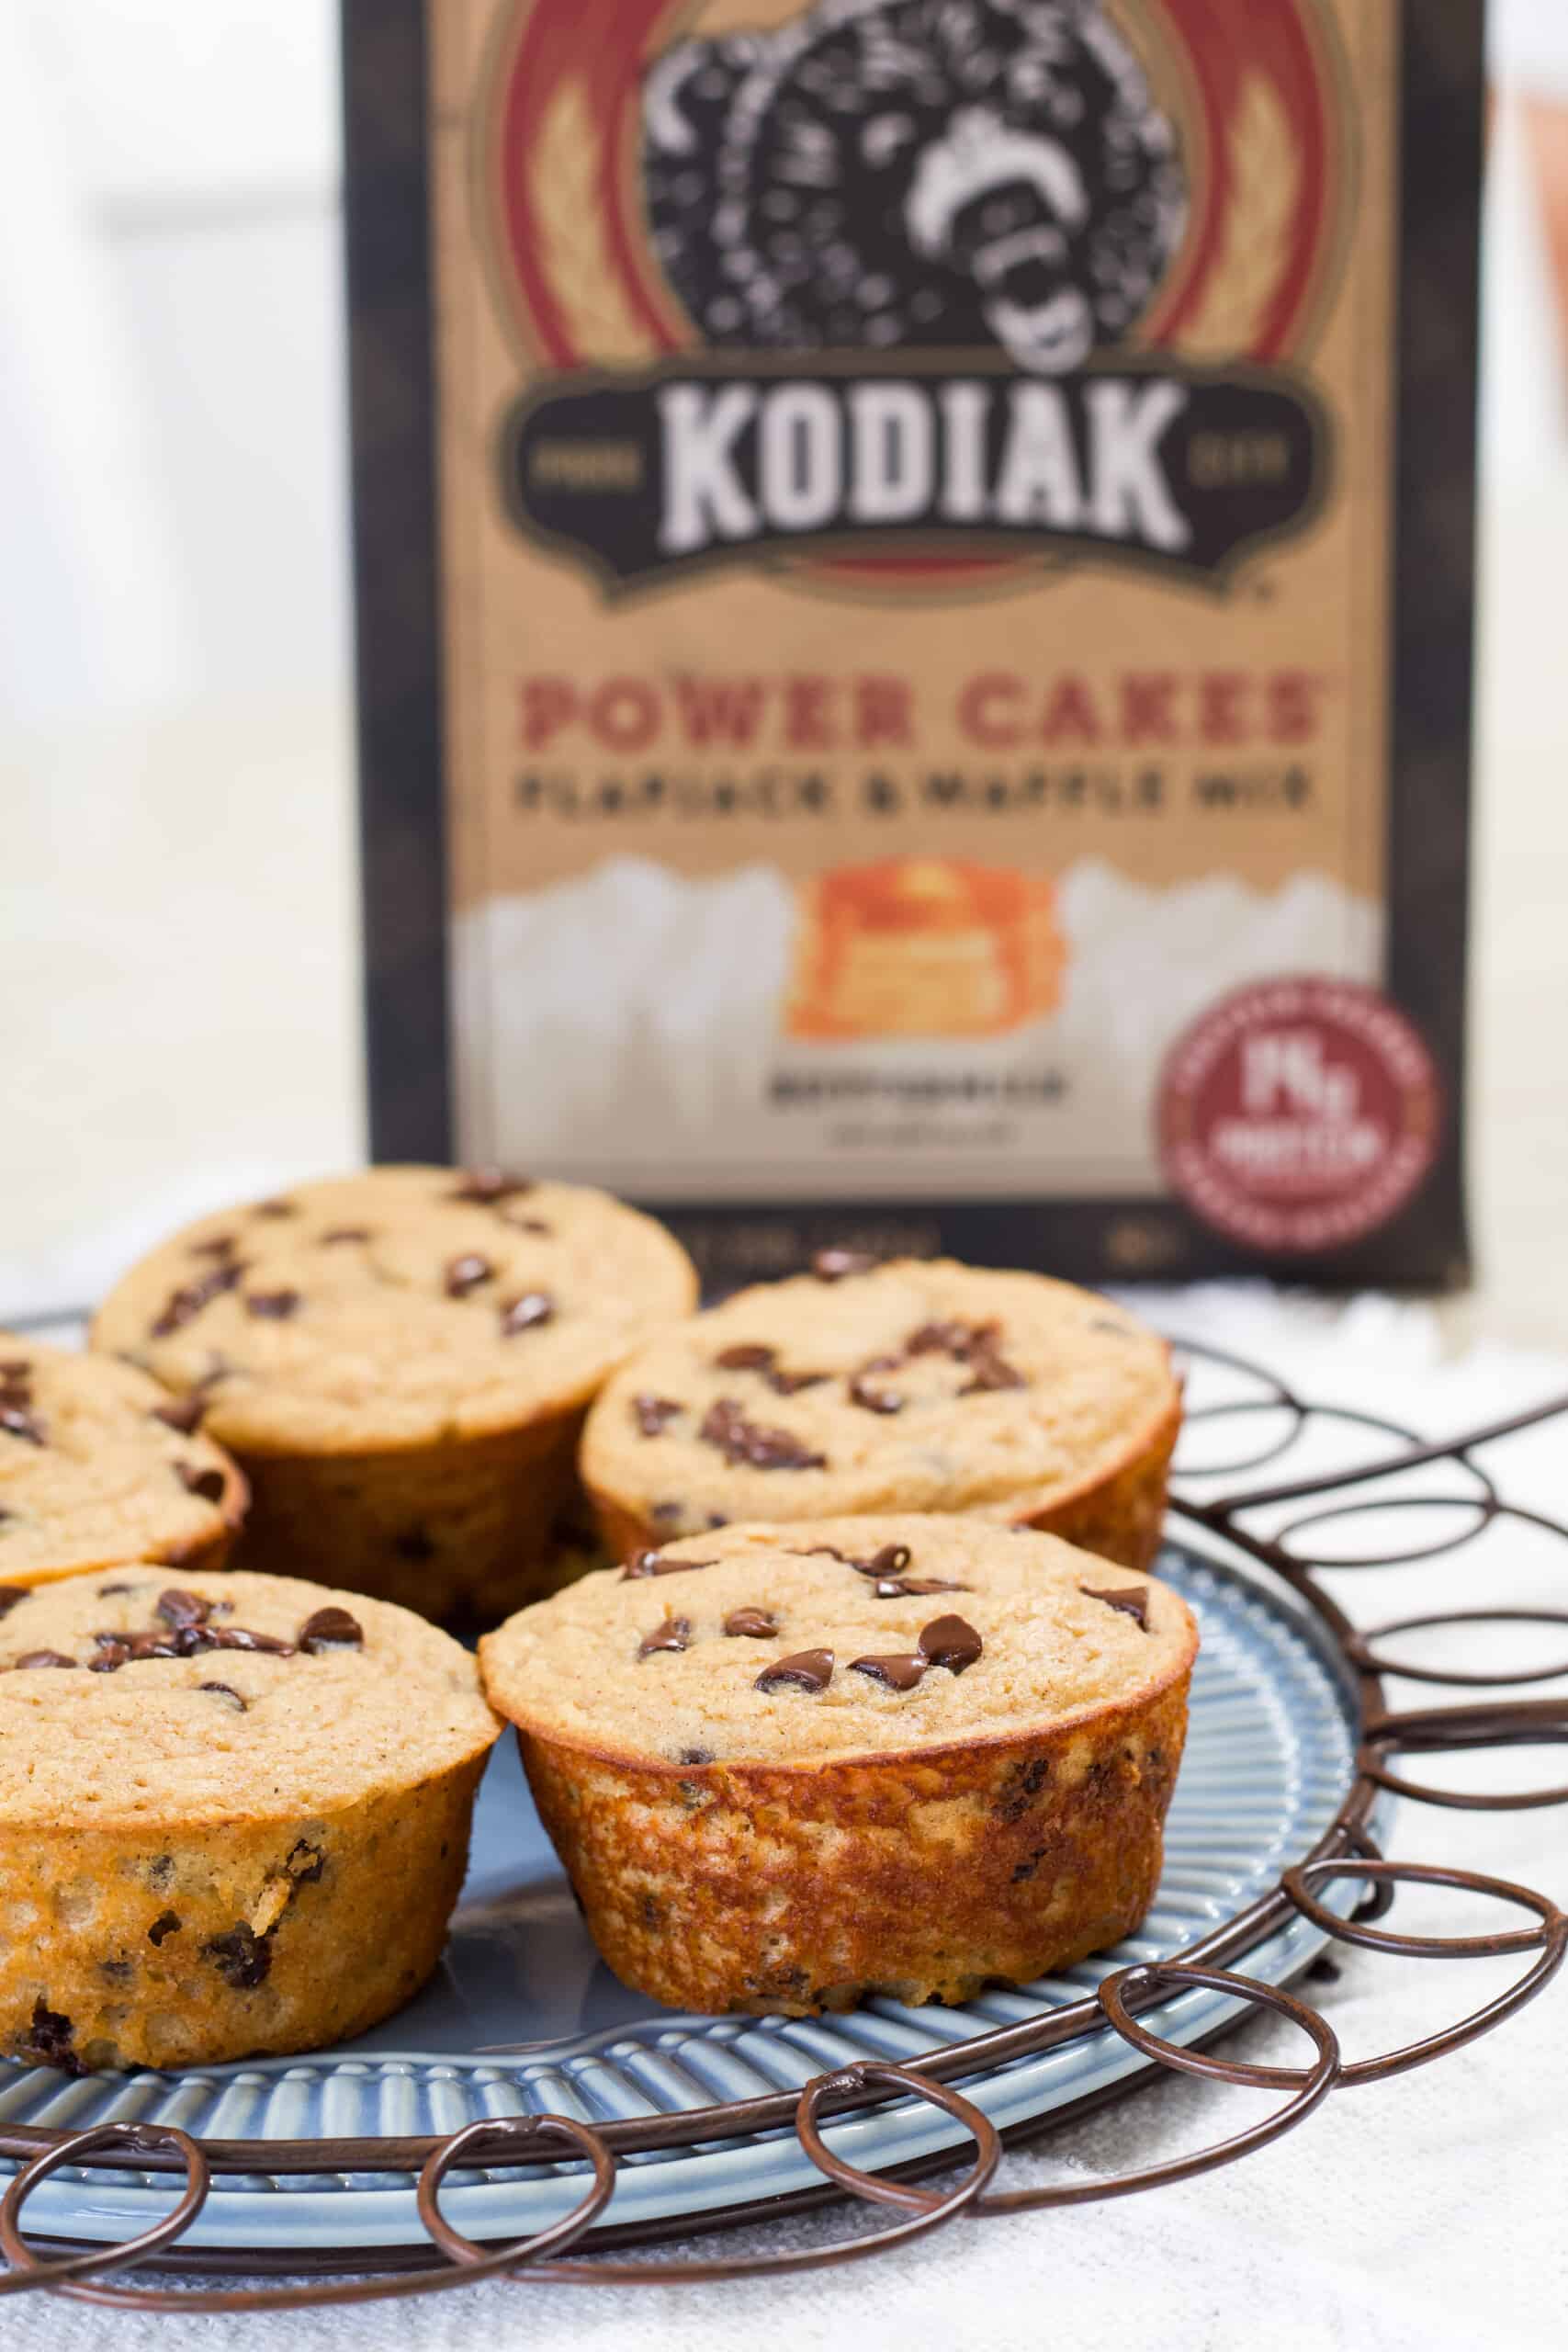 Five muffins on a light blue plate with the Kodiak Cakes box in the background.